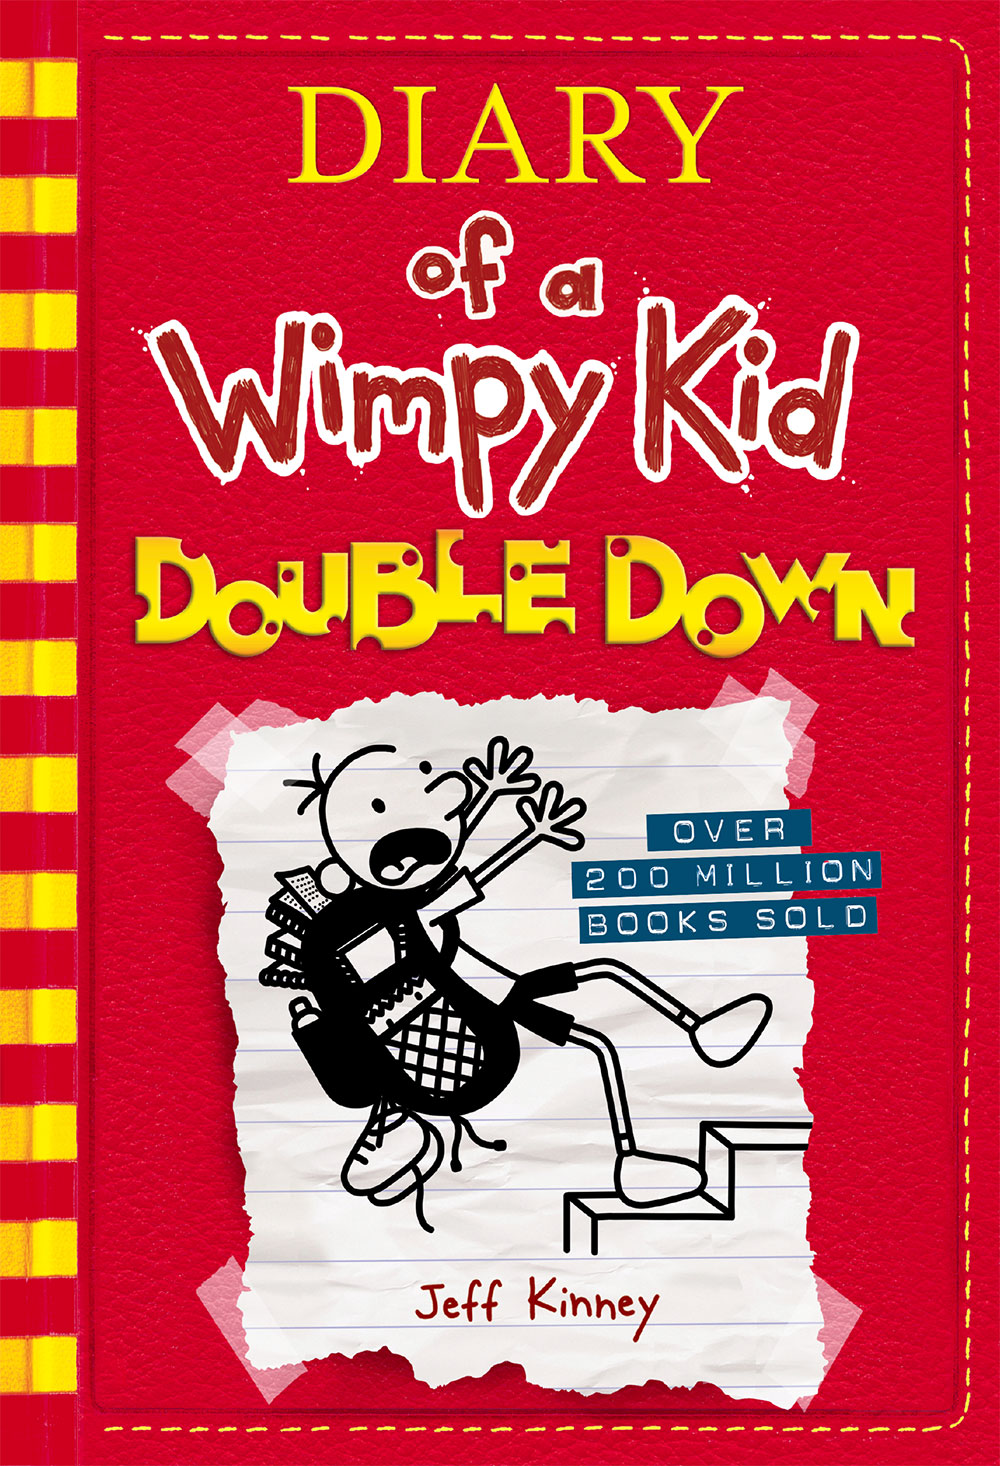 Diary of a Wimpy Kid T.11 - Double Down  | 9-12 years old